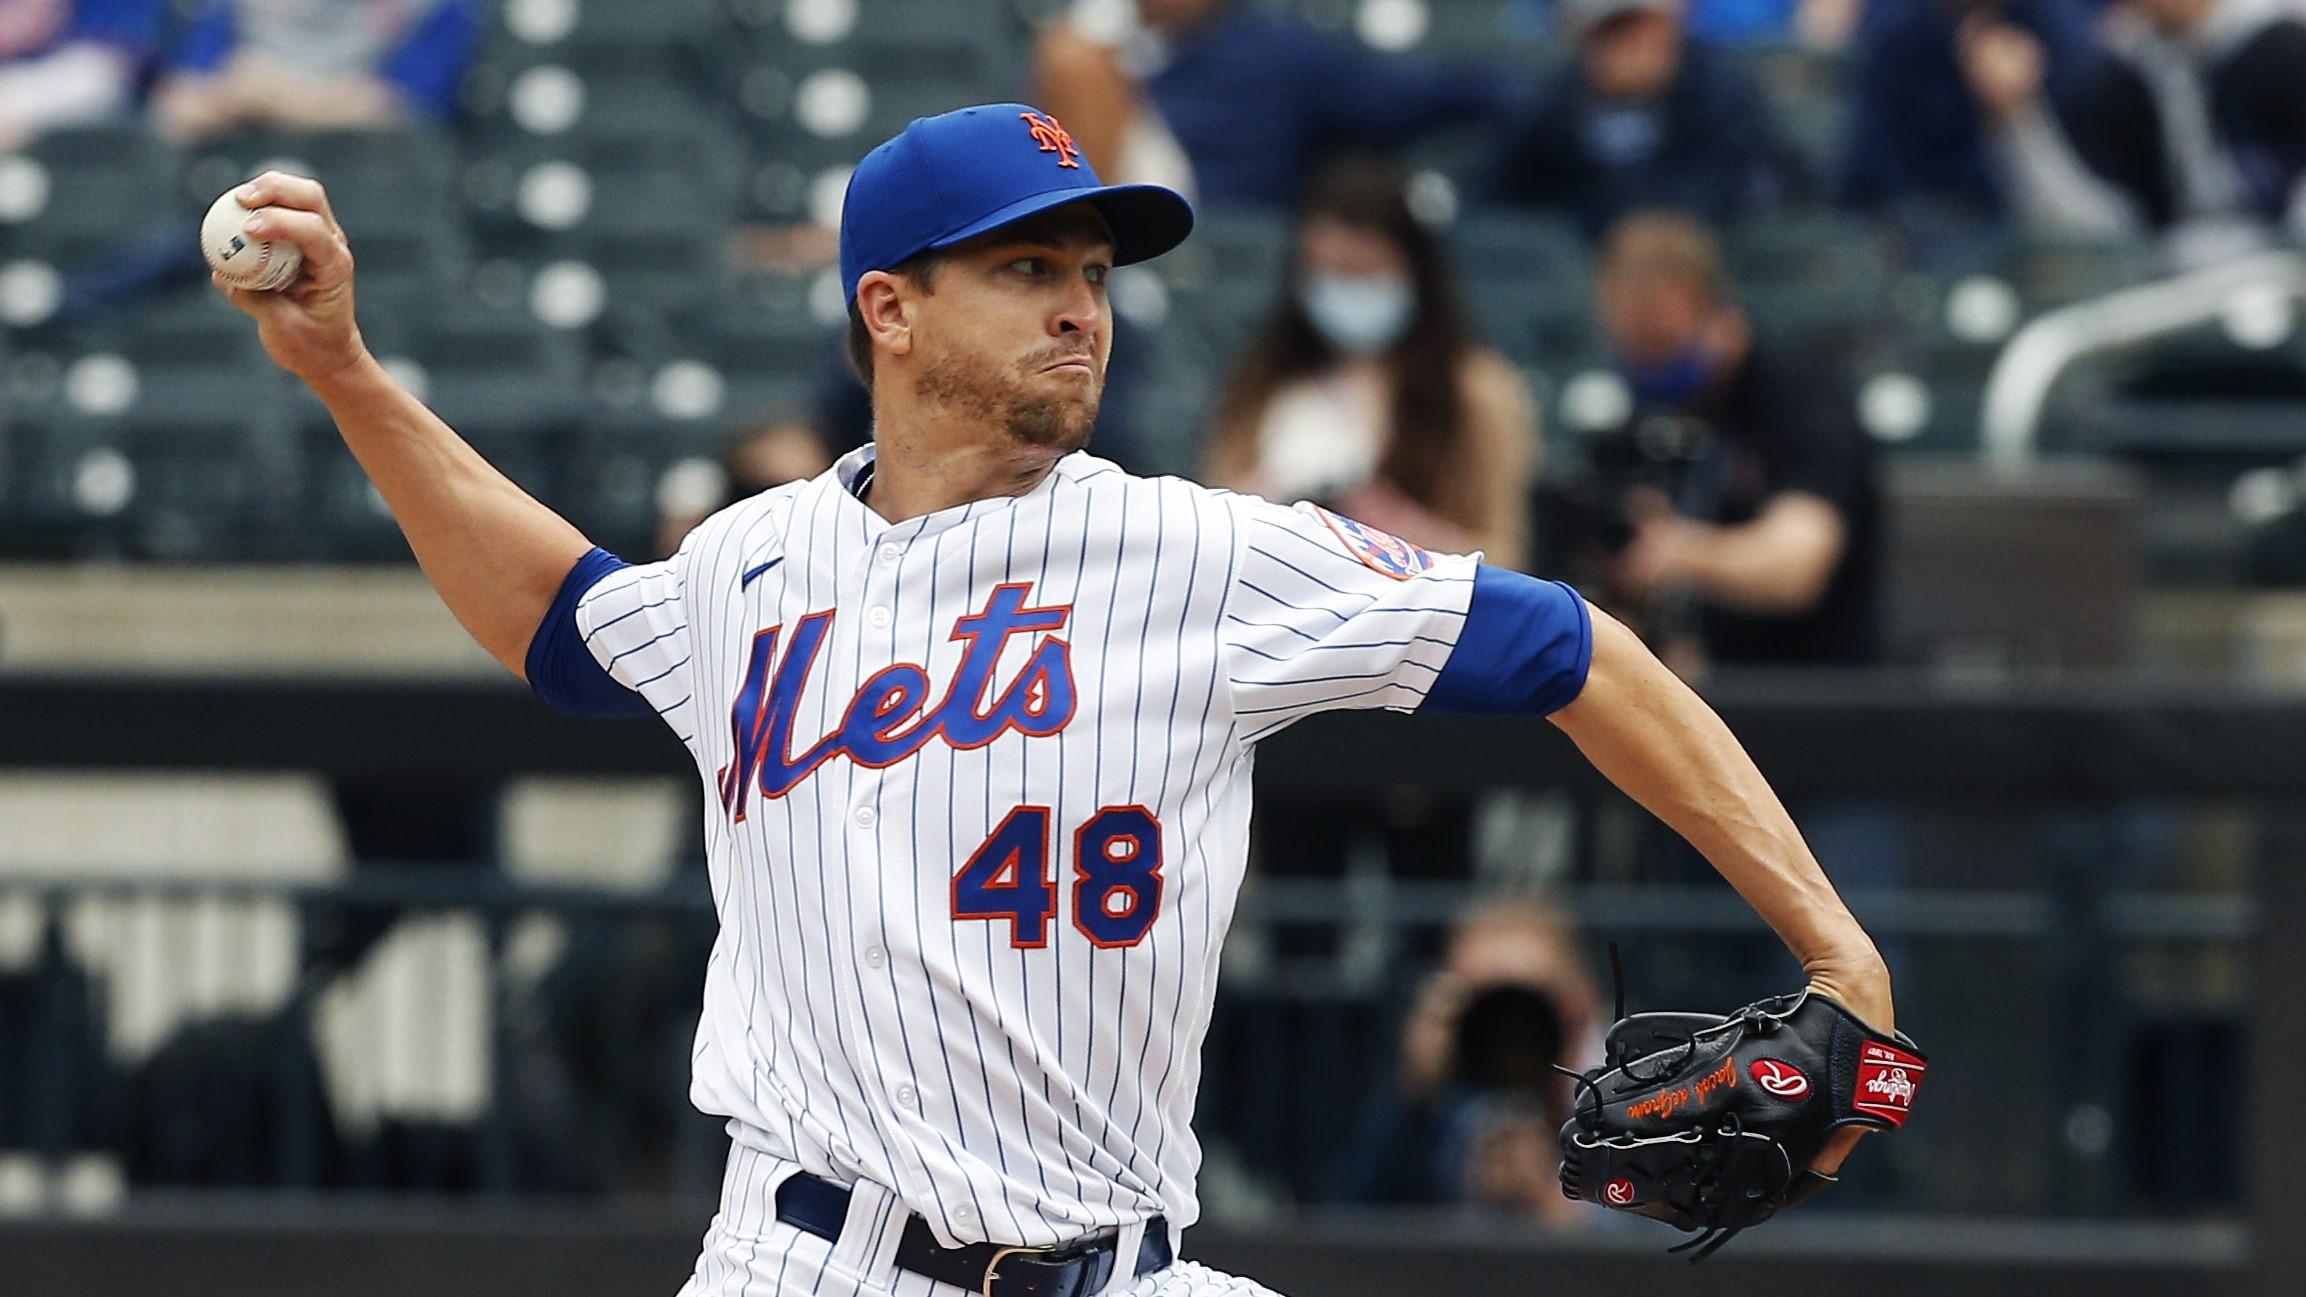 New York Mets starting pitcher Jacob deGrom (48) pitches against the Miami Marlins during the first inning at Citi Field. / Andy Marlin-USA TODAY Sports